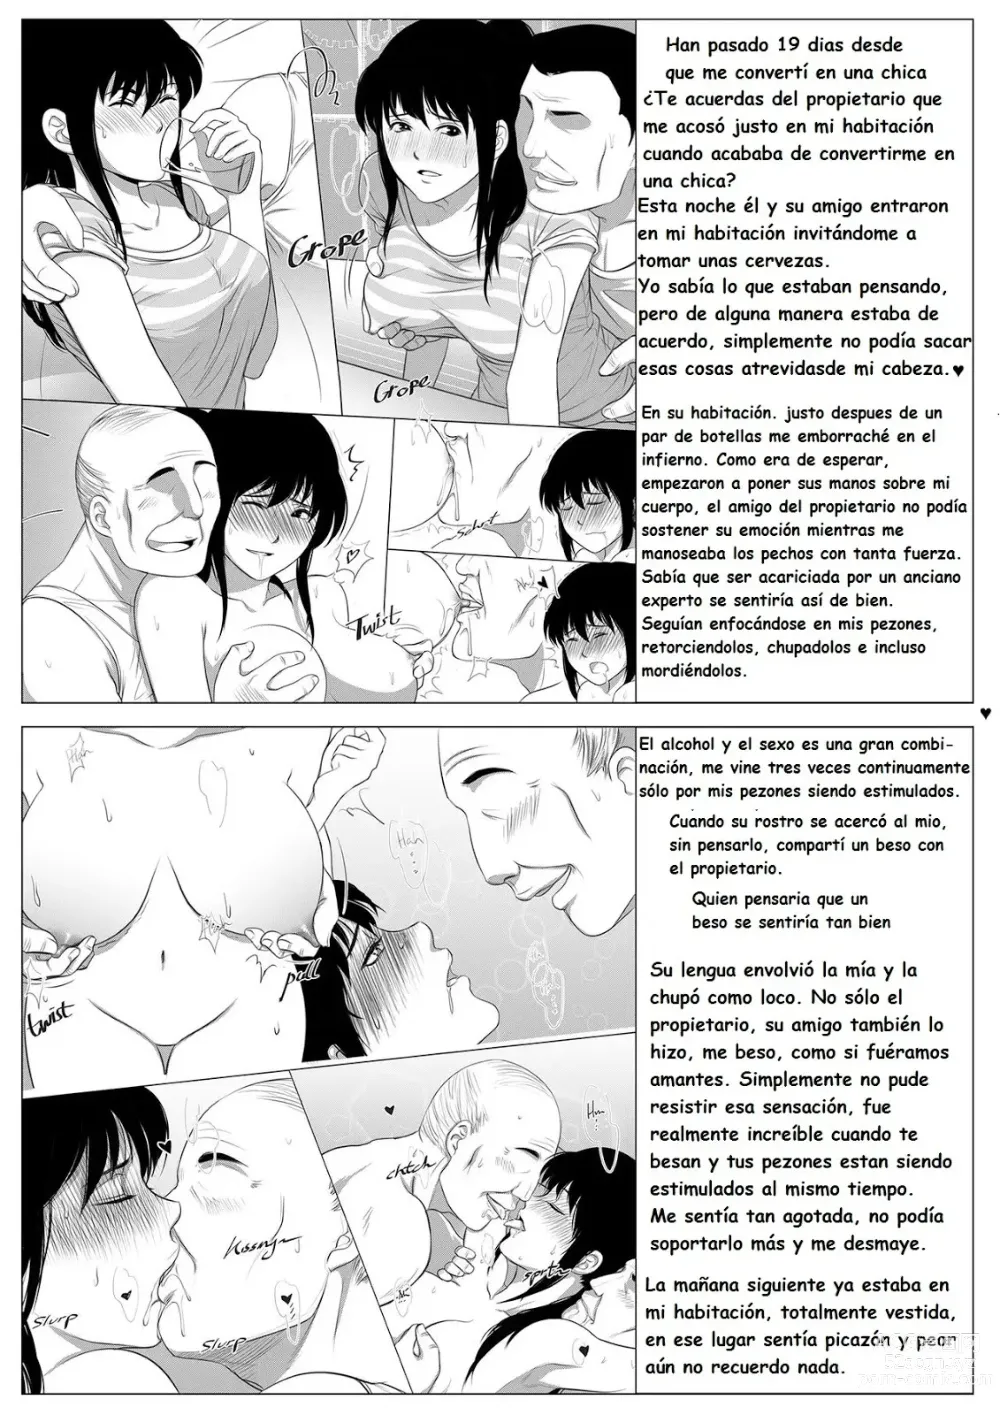 Page 15 of doujinshi A TG Project